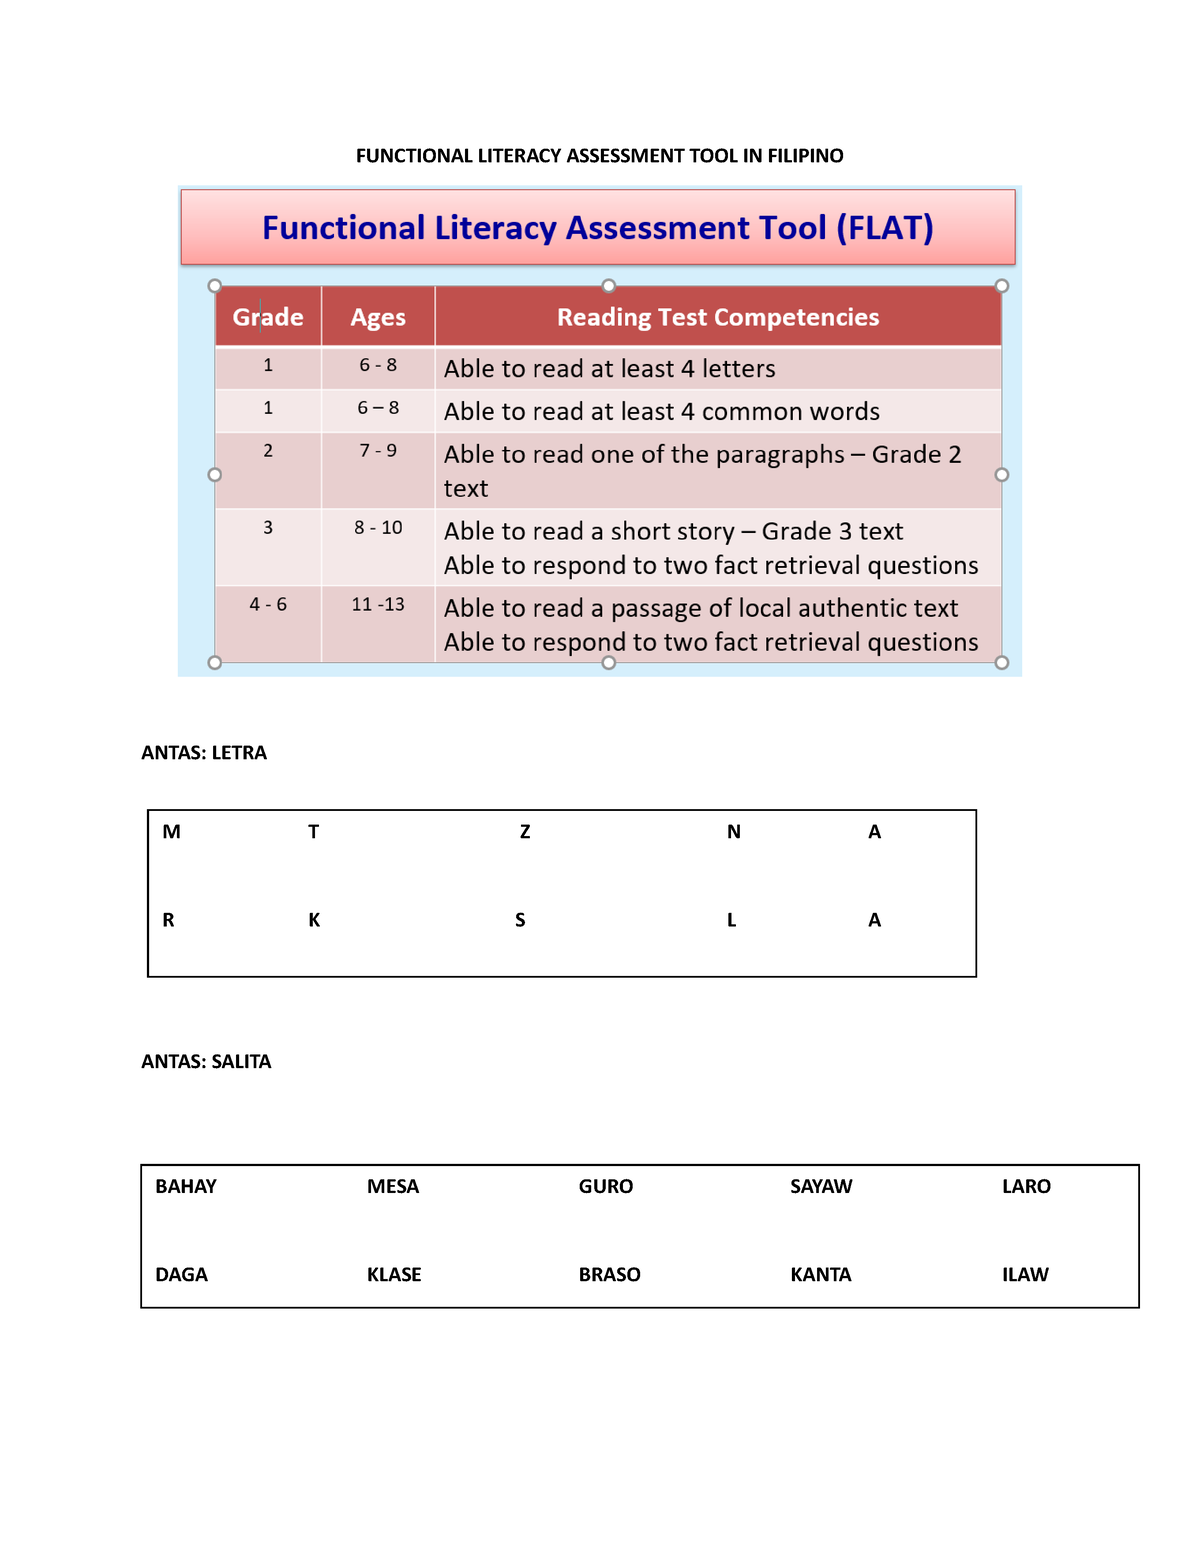 flat-functional-literacy-assessment-tool-in-filipino-functional